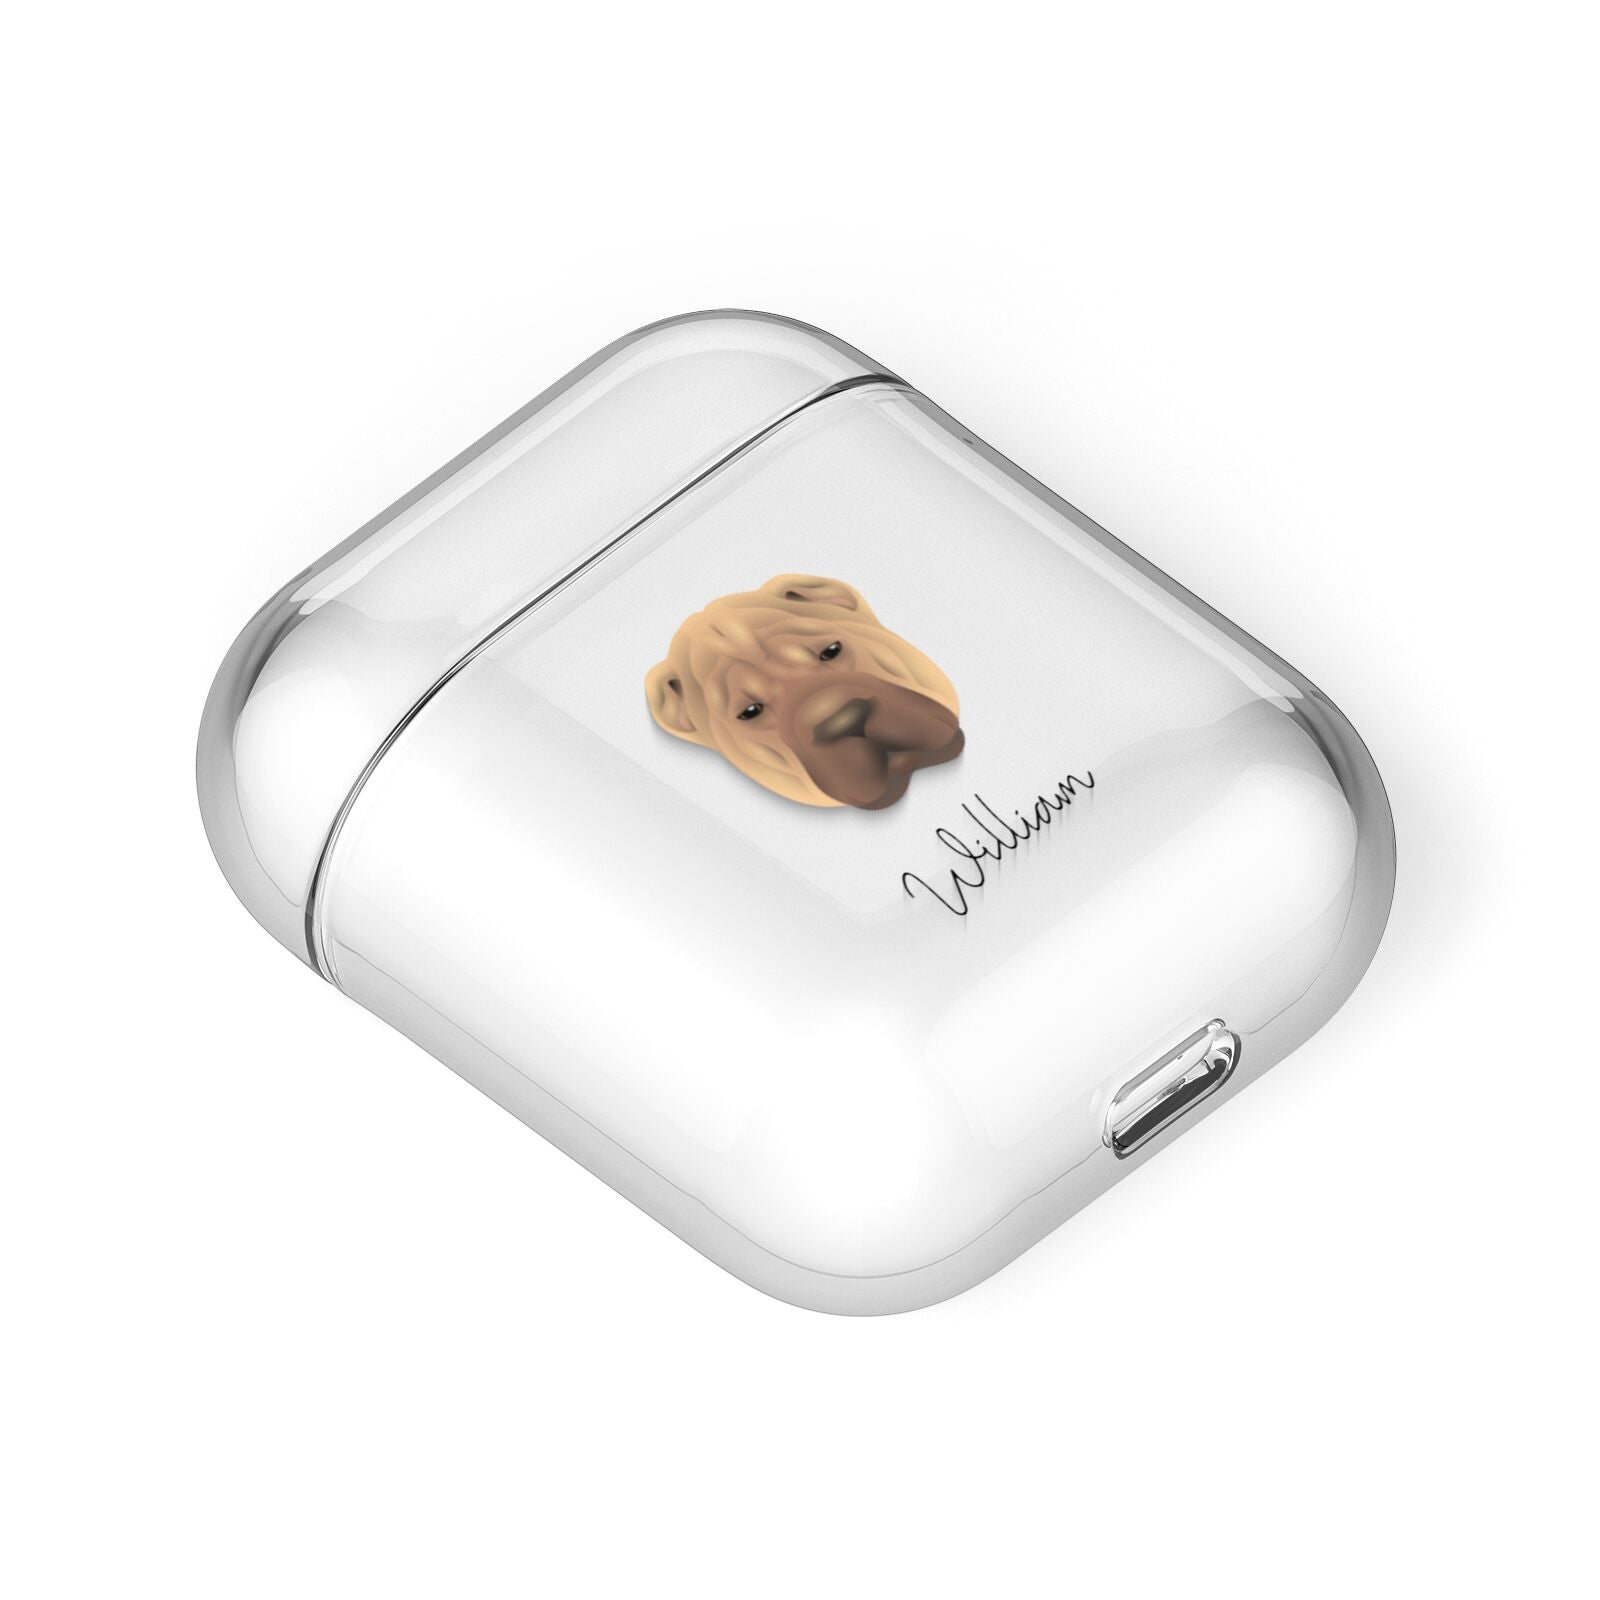 Shar Pei Personalised AirPods Case Laid Flat